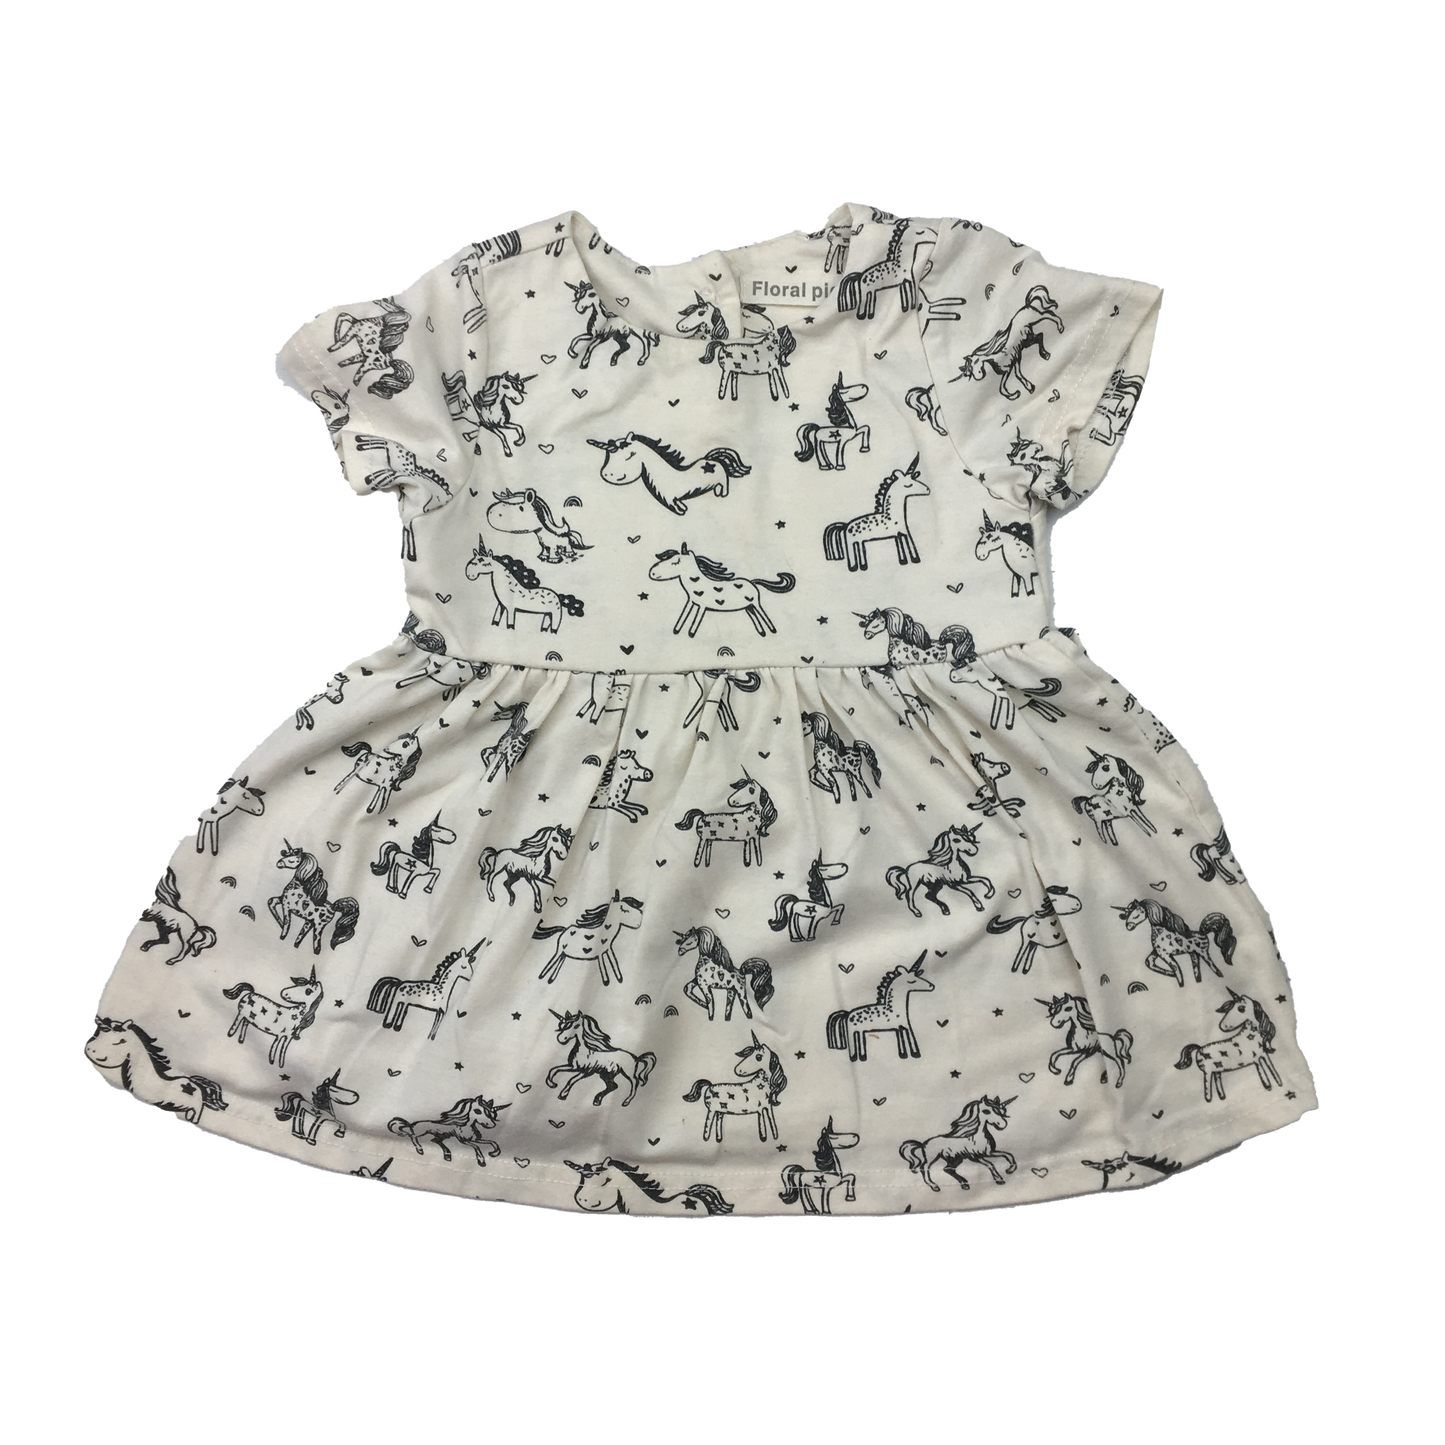 Floral Pig White Dress with Unicorns 12-24M